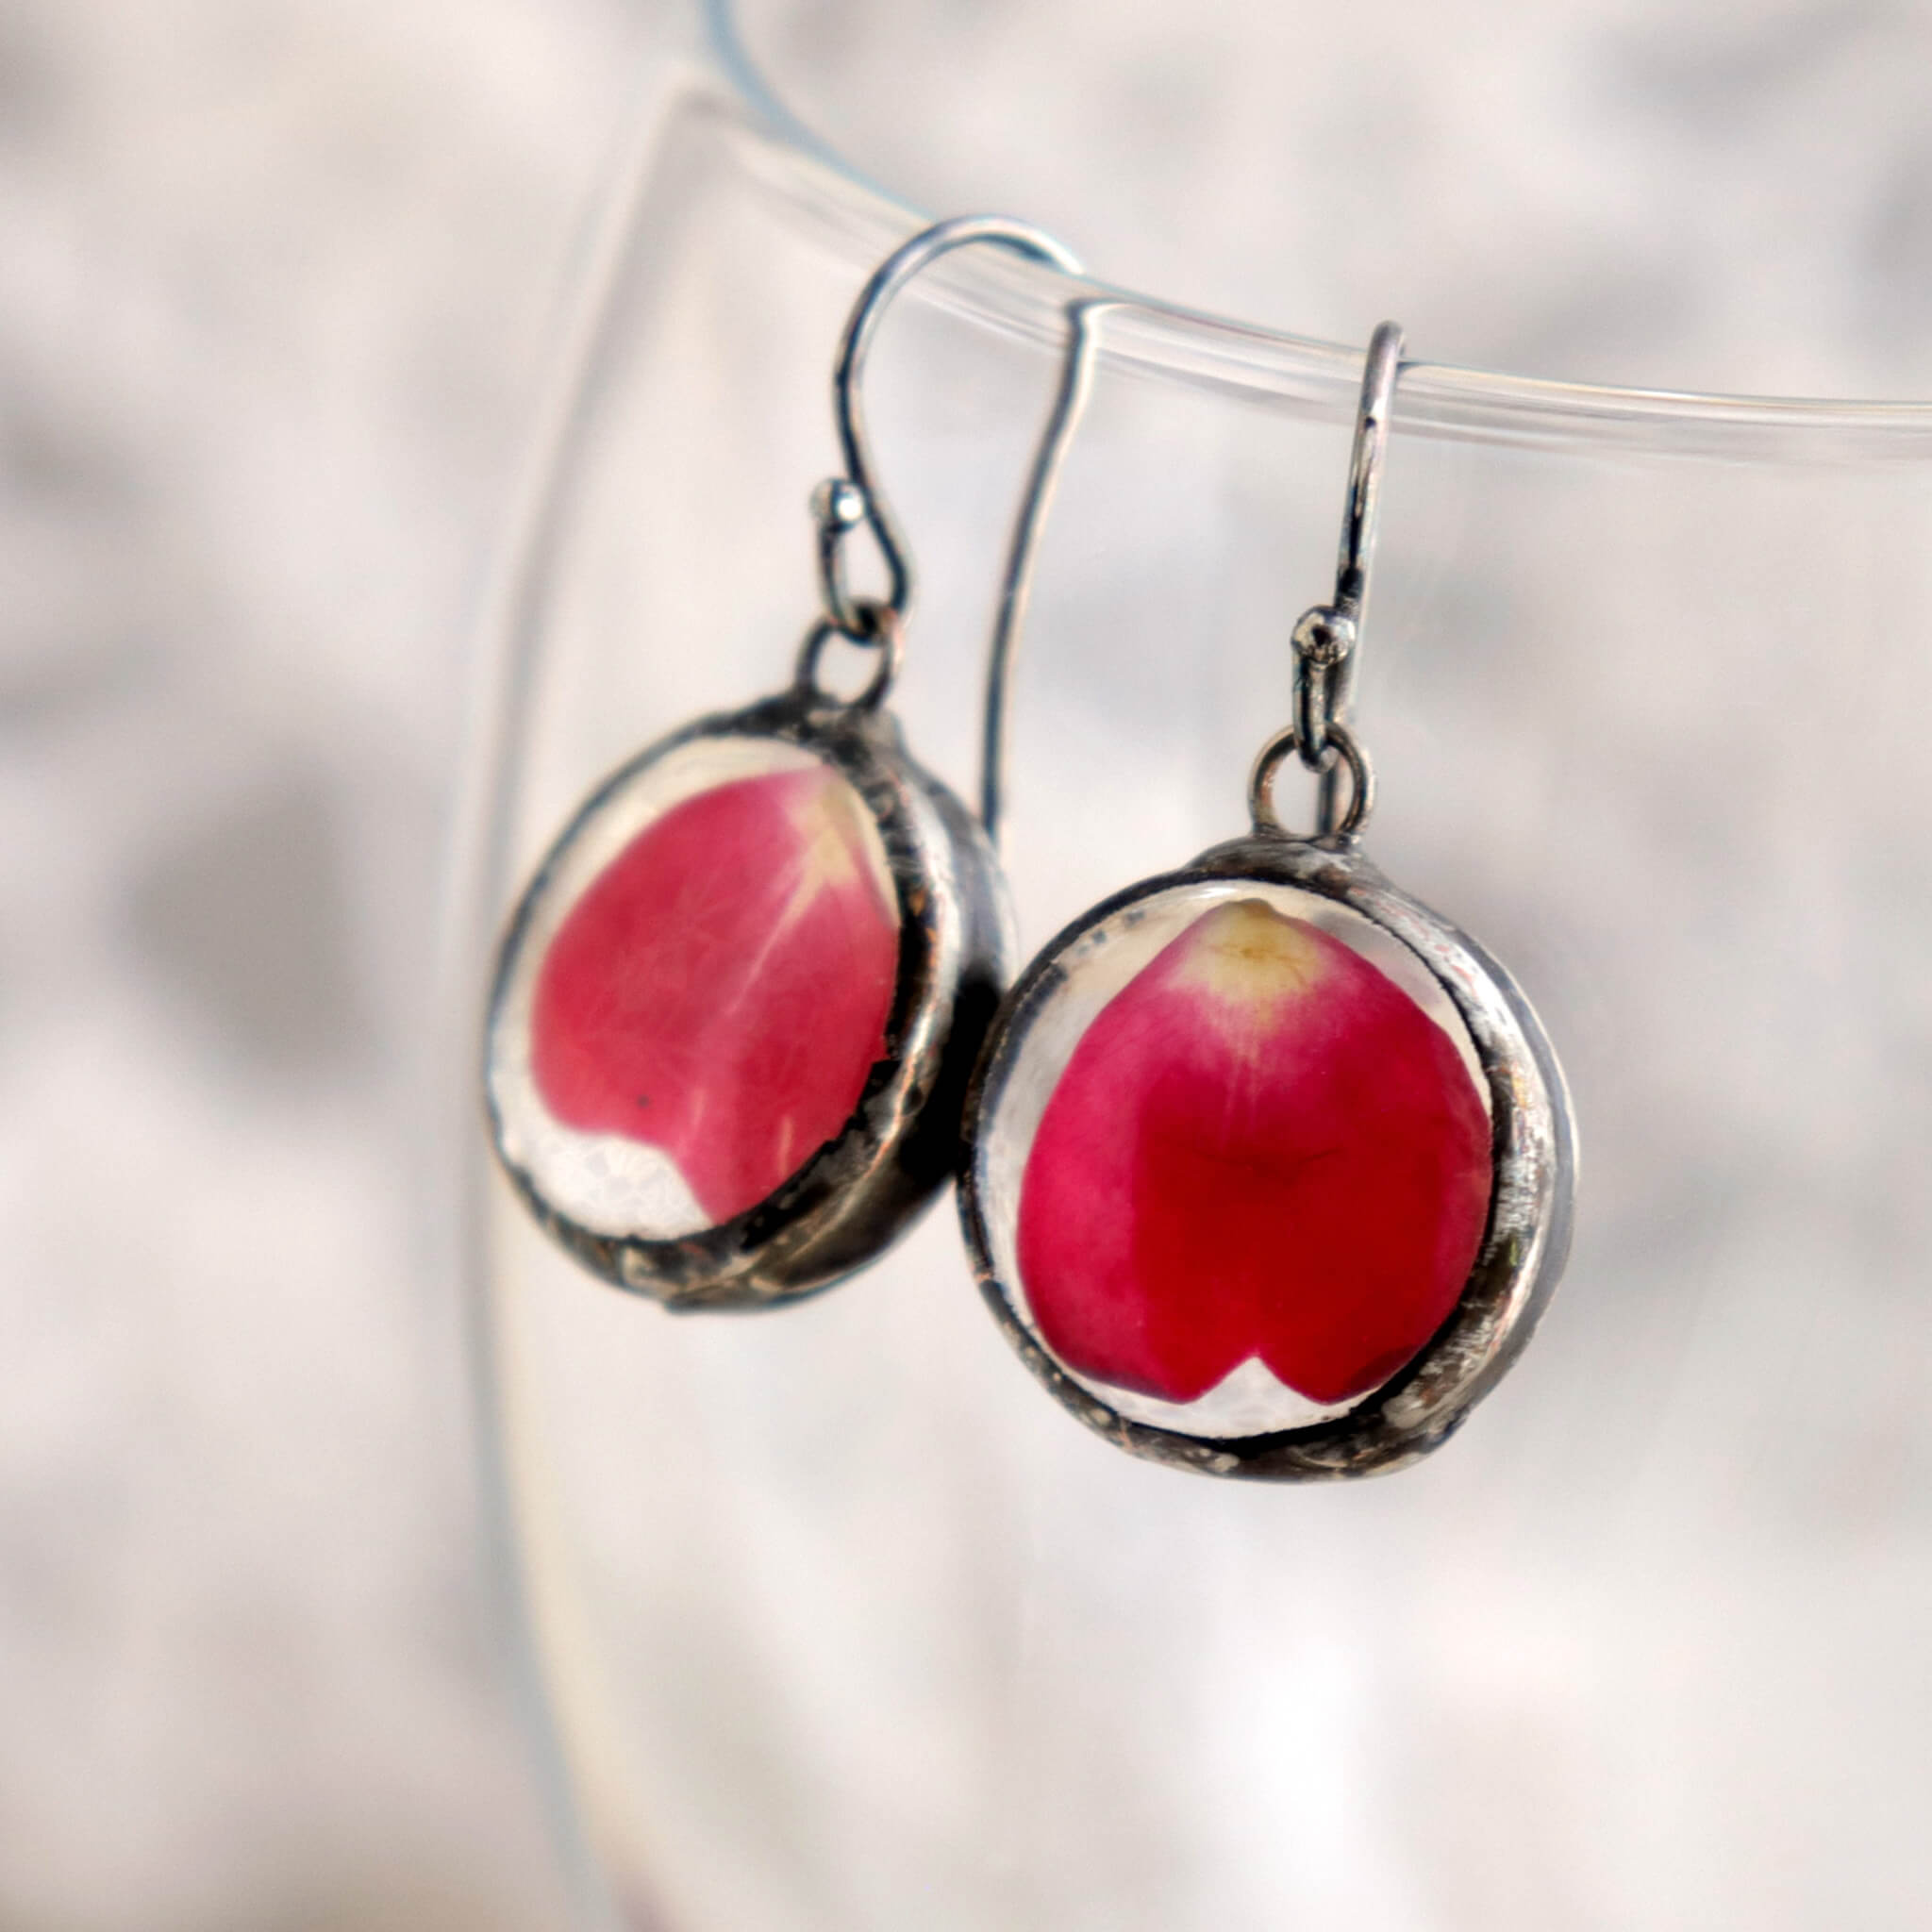 Rose petal earrings hanging from the edge of a wine glass